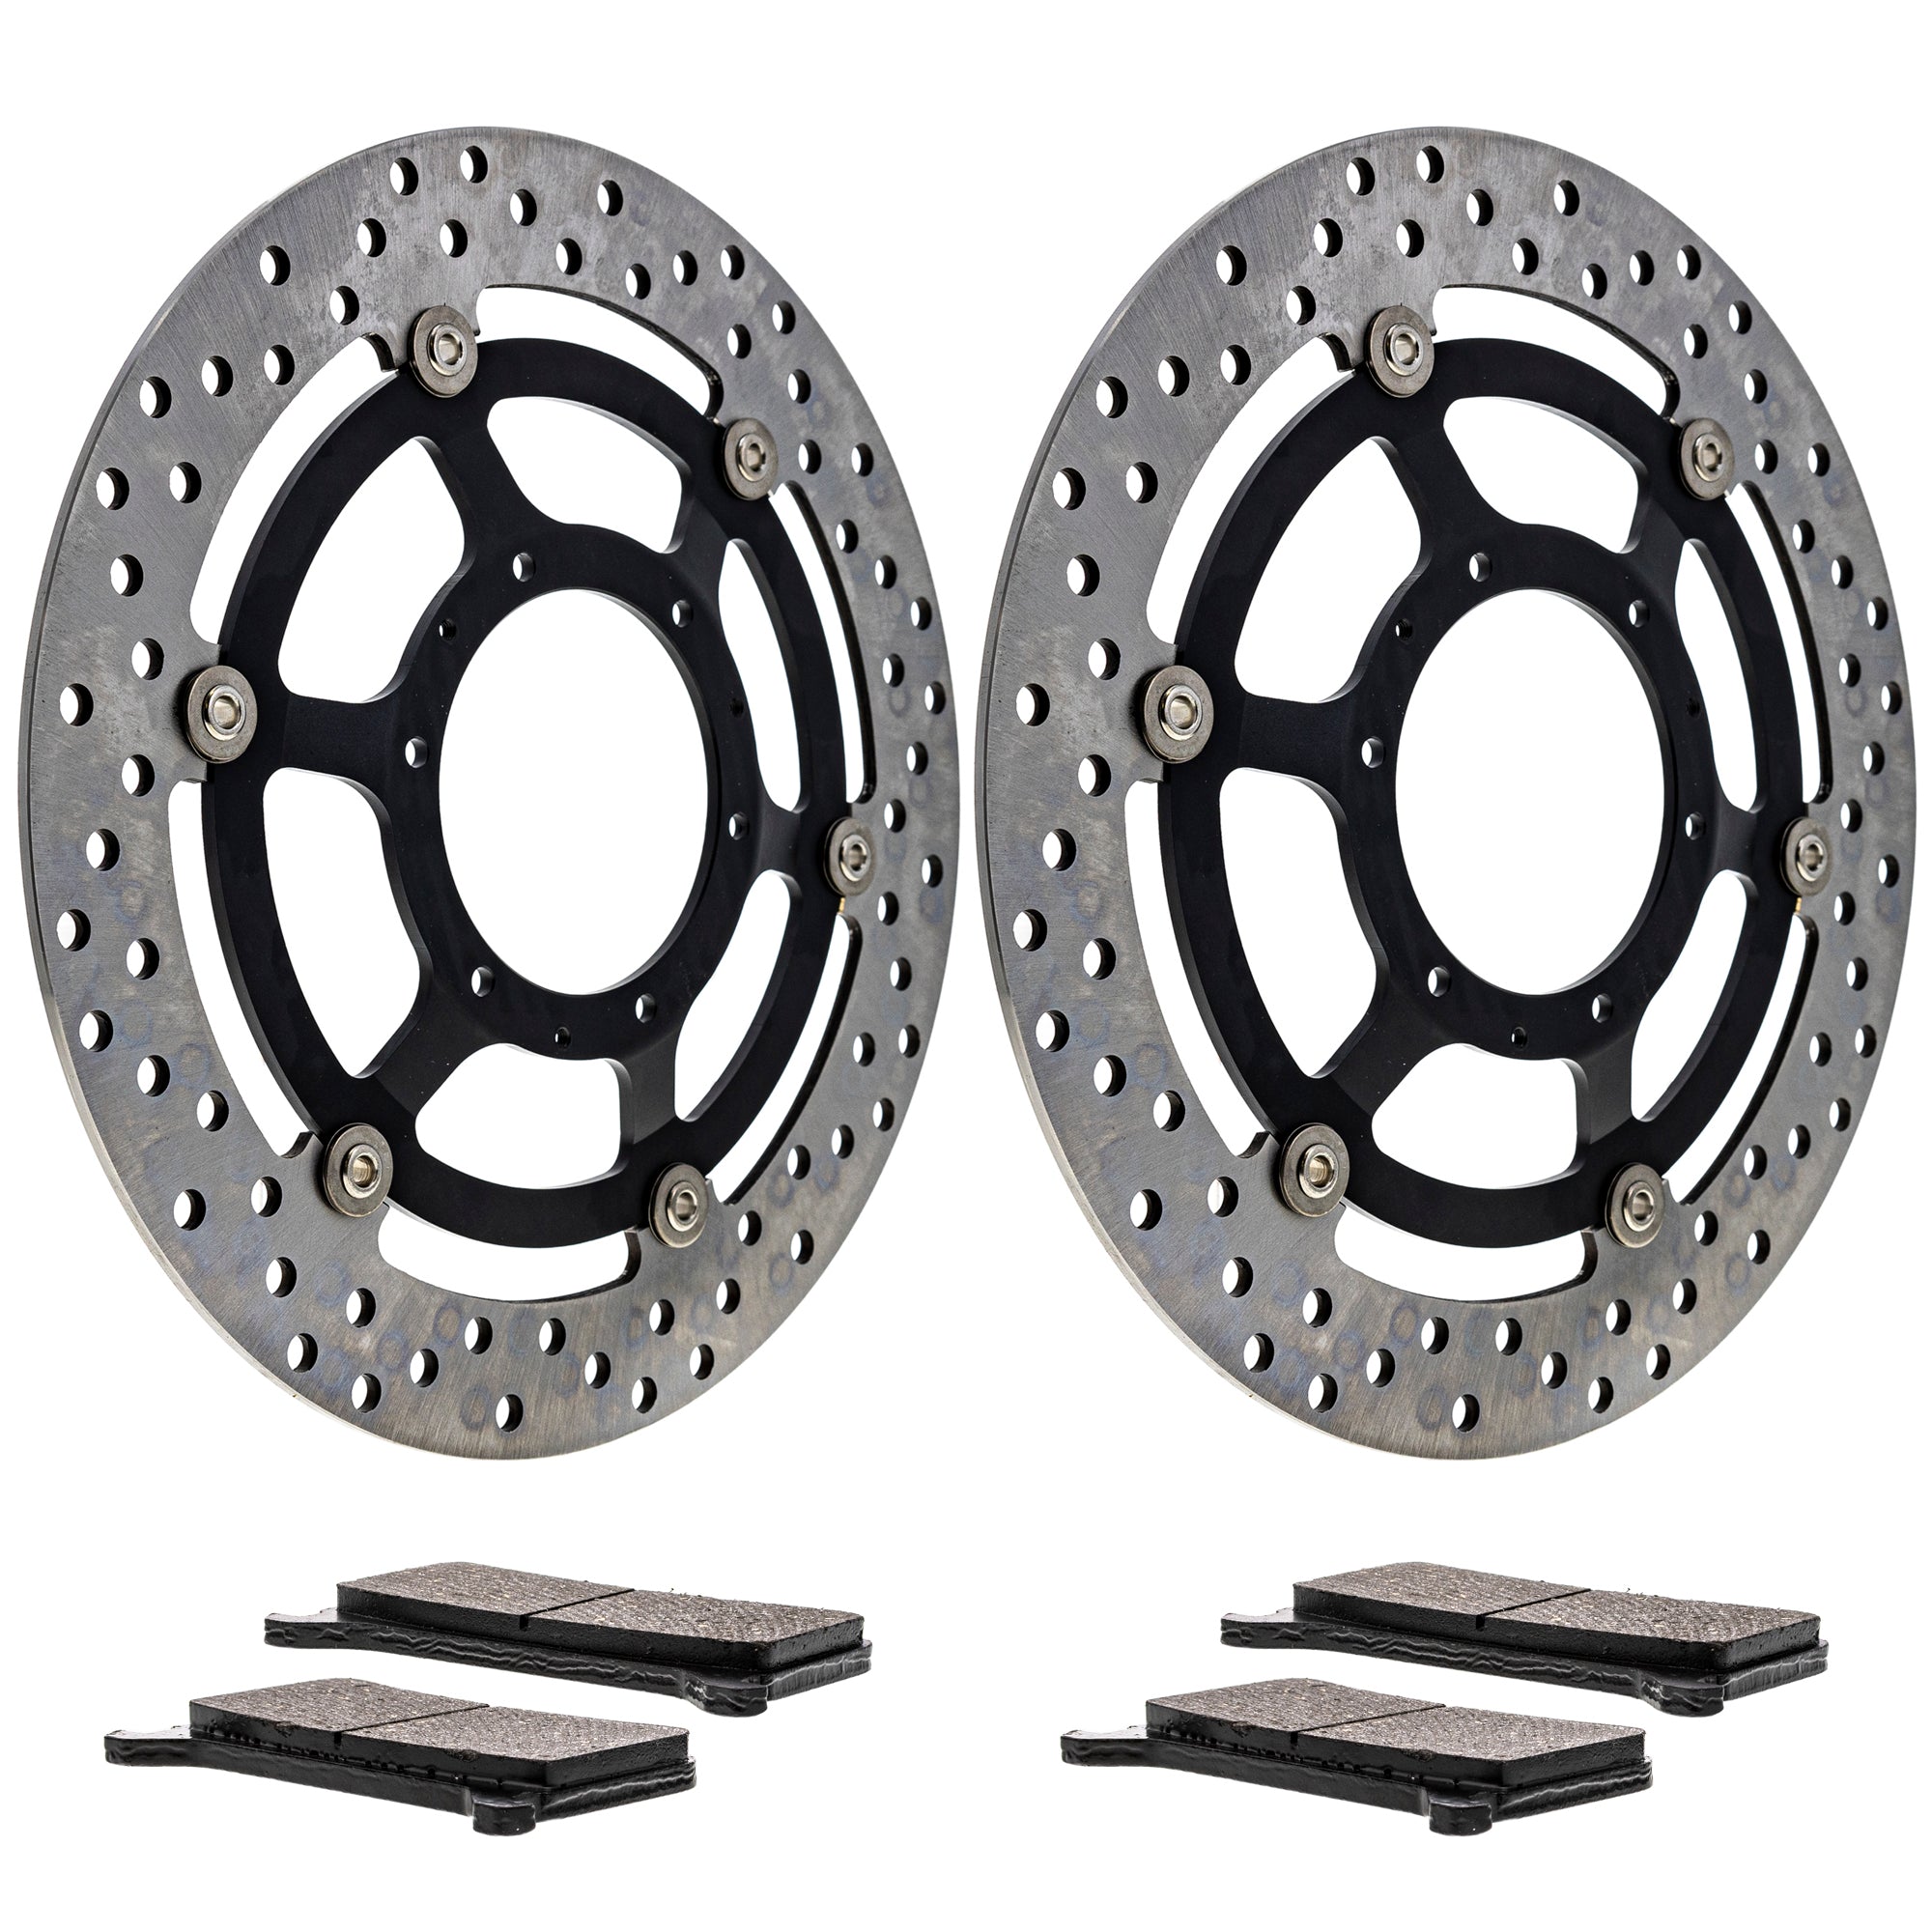 Front Brake Rotors and Pads Kit for zOTHER Yamaha CBR600RR 06455-MKF-D41 NICHE MK1006551